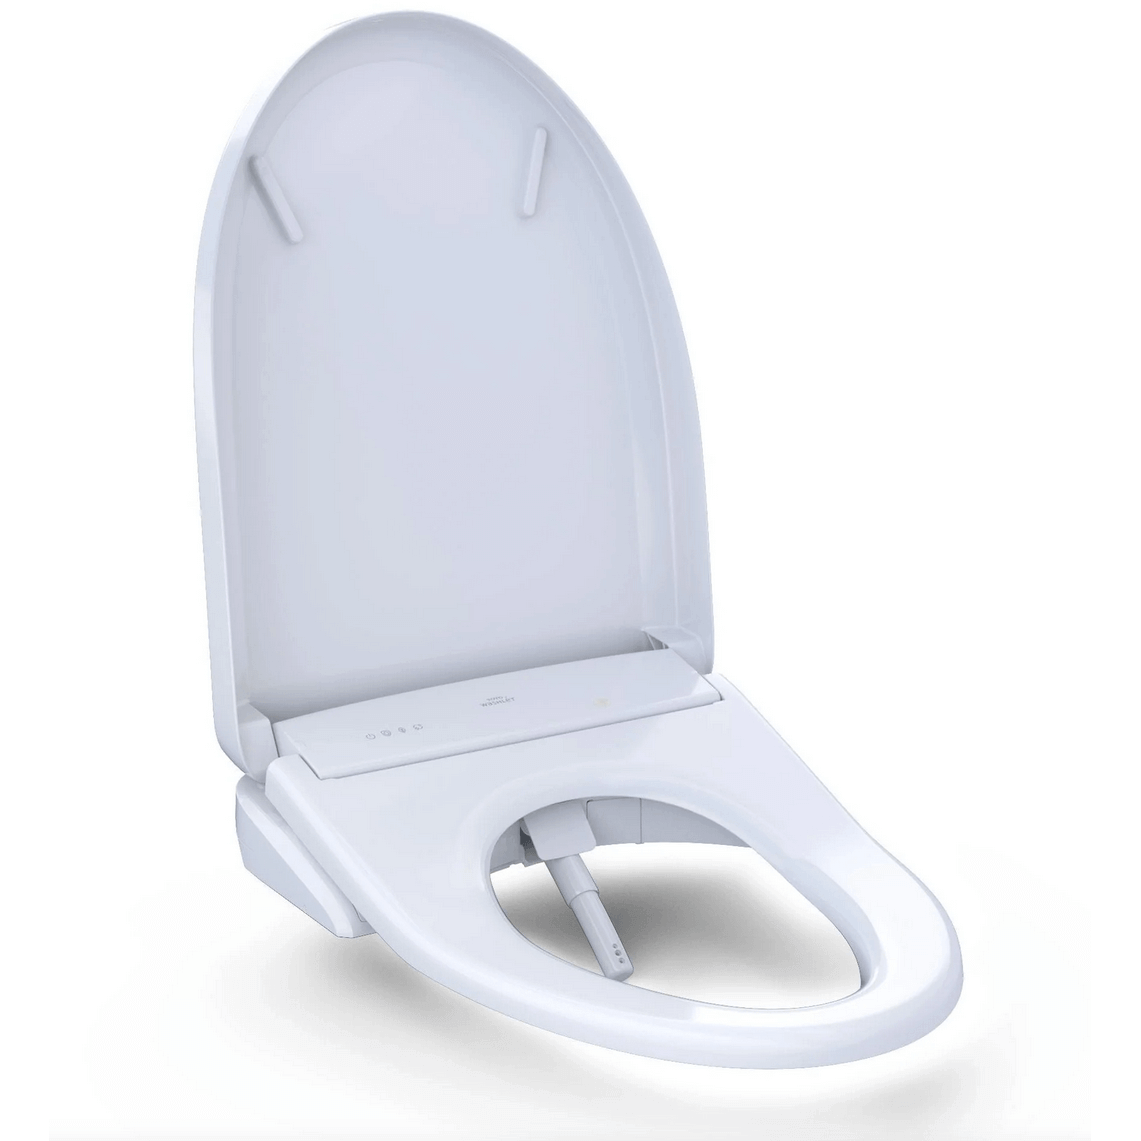 S7A Washlet+ Auto Classic Lid Bidet Seat - side angled view with lid open